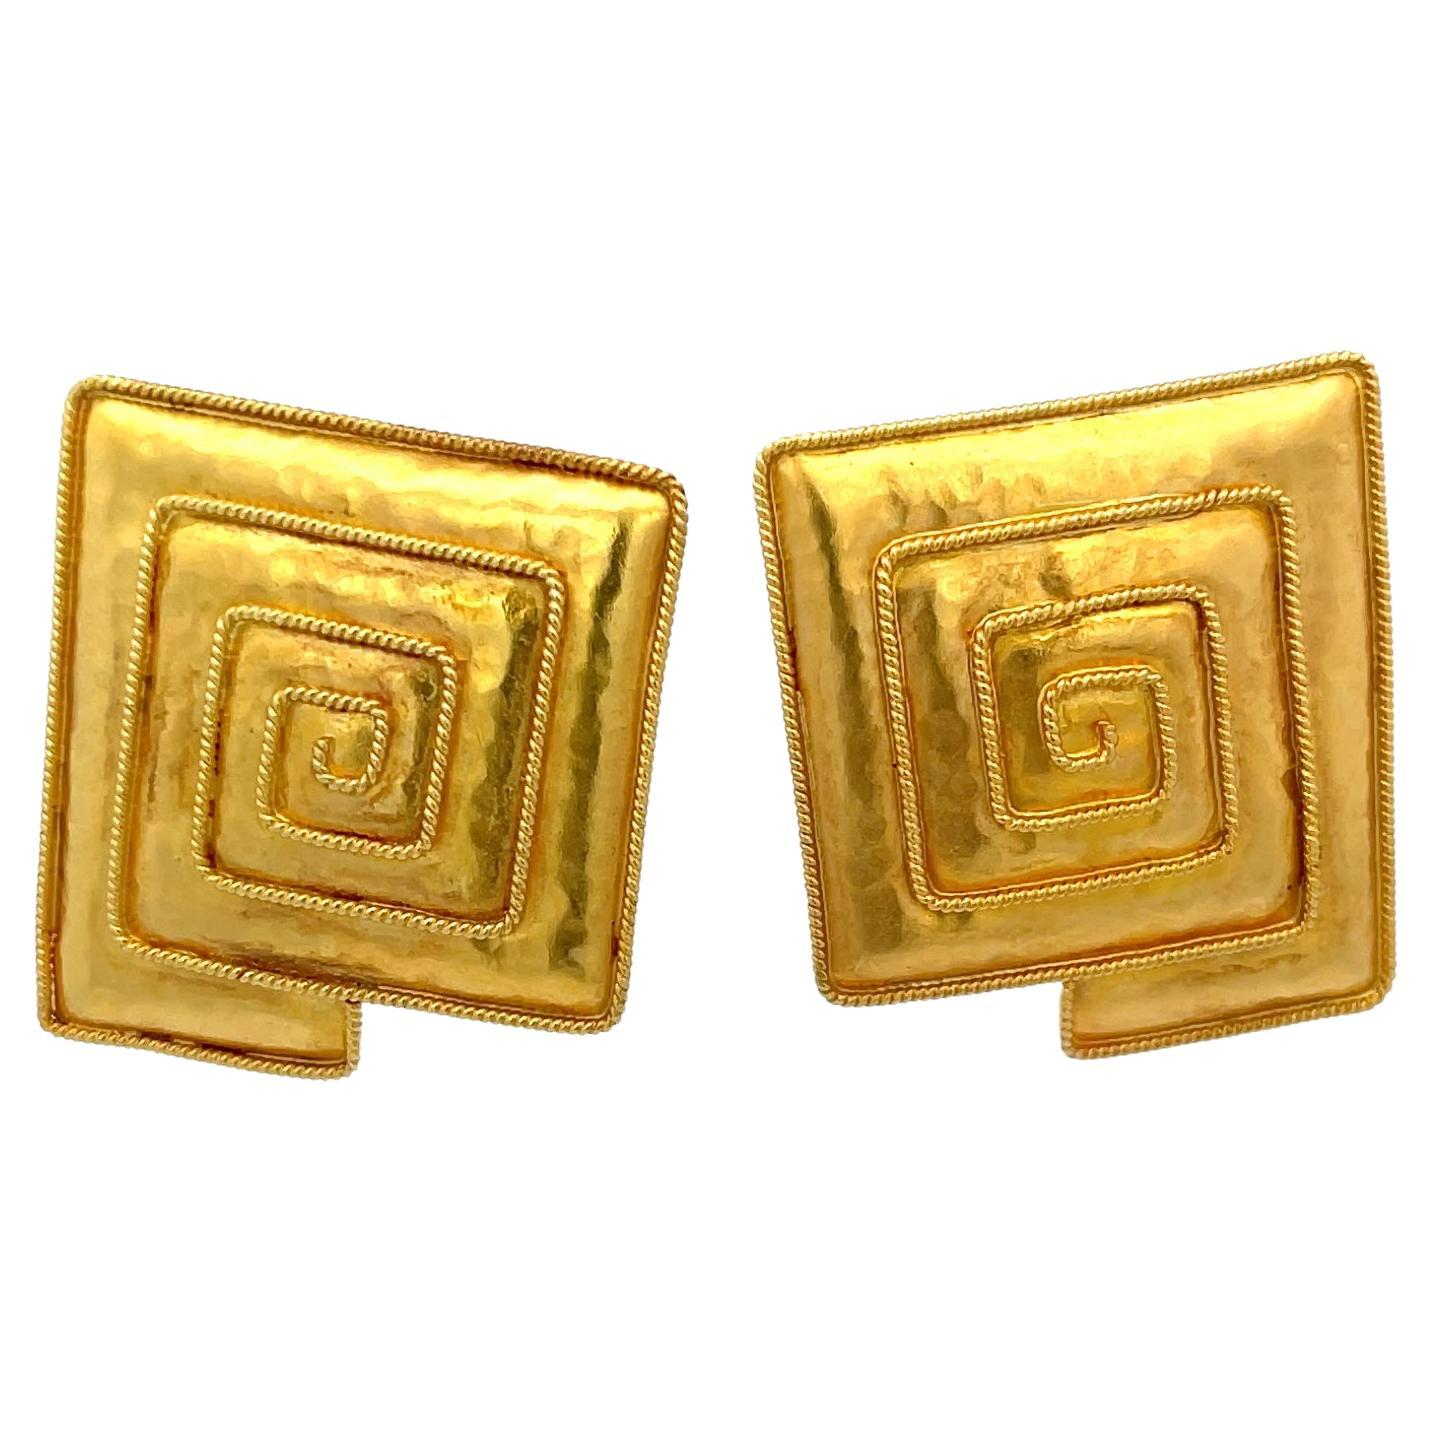 Greek Clip-On Square Earrings 22K Yellow Gold